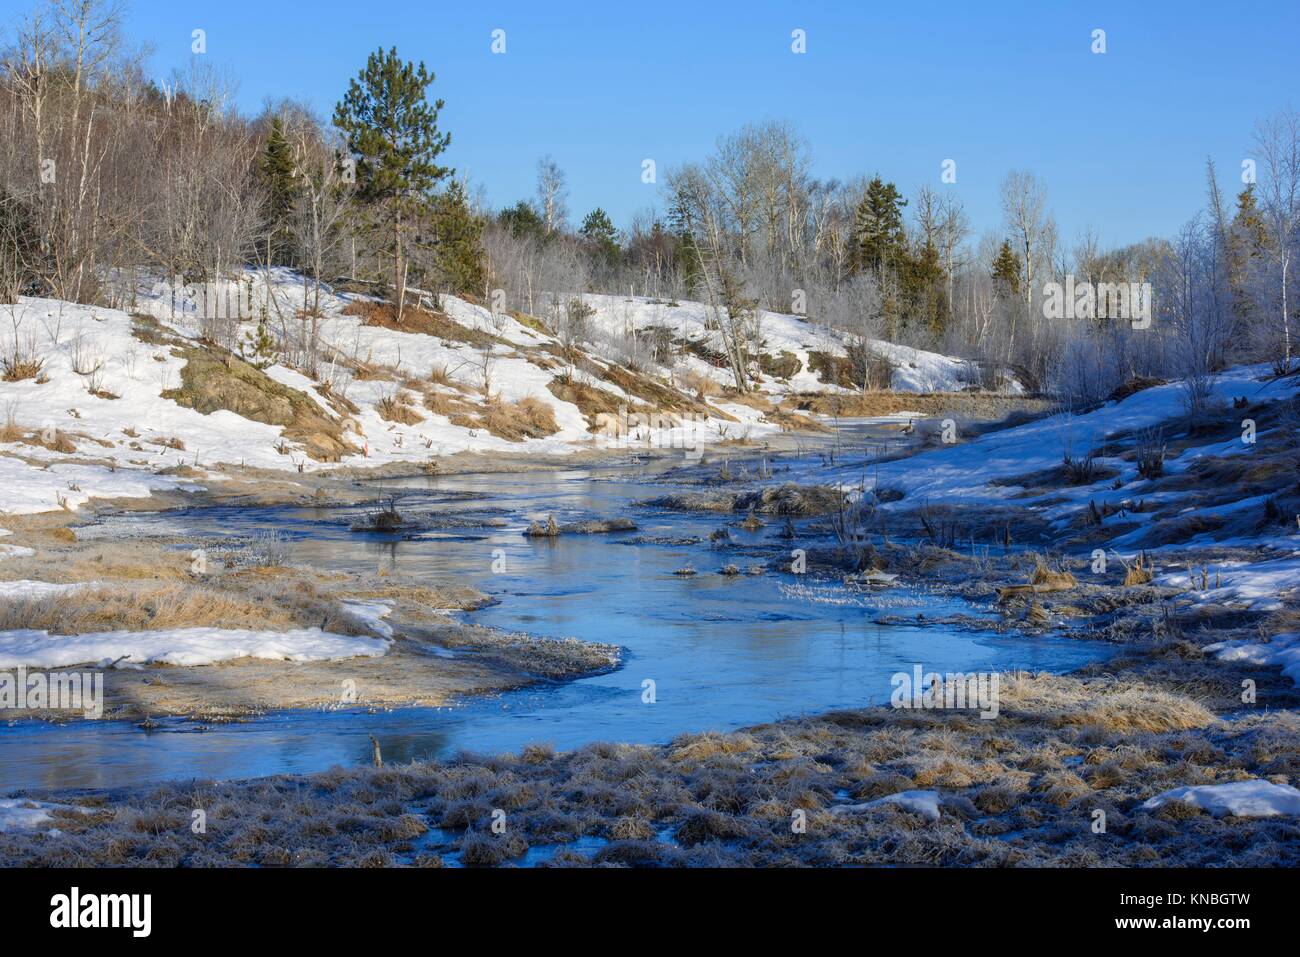 A watercourse dammed by beavers in early spring, Greater Sudbury, Ontario, Canada. Stock Photo